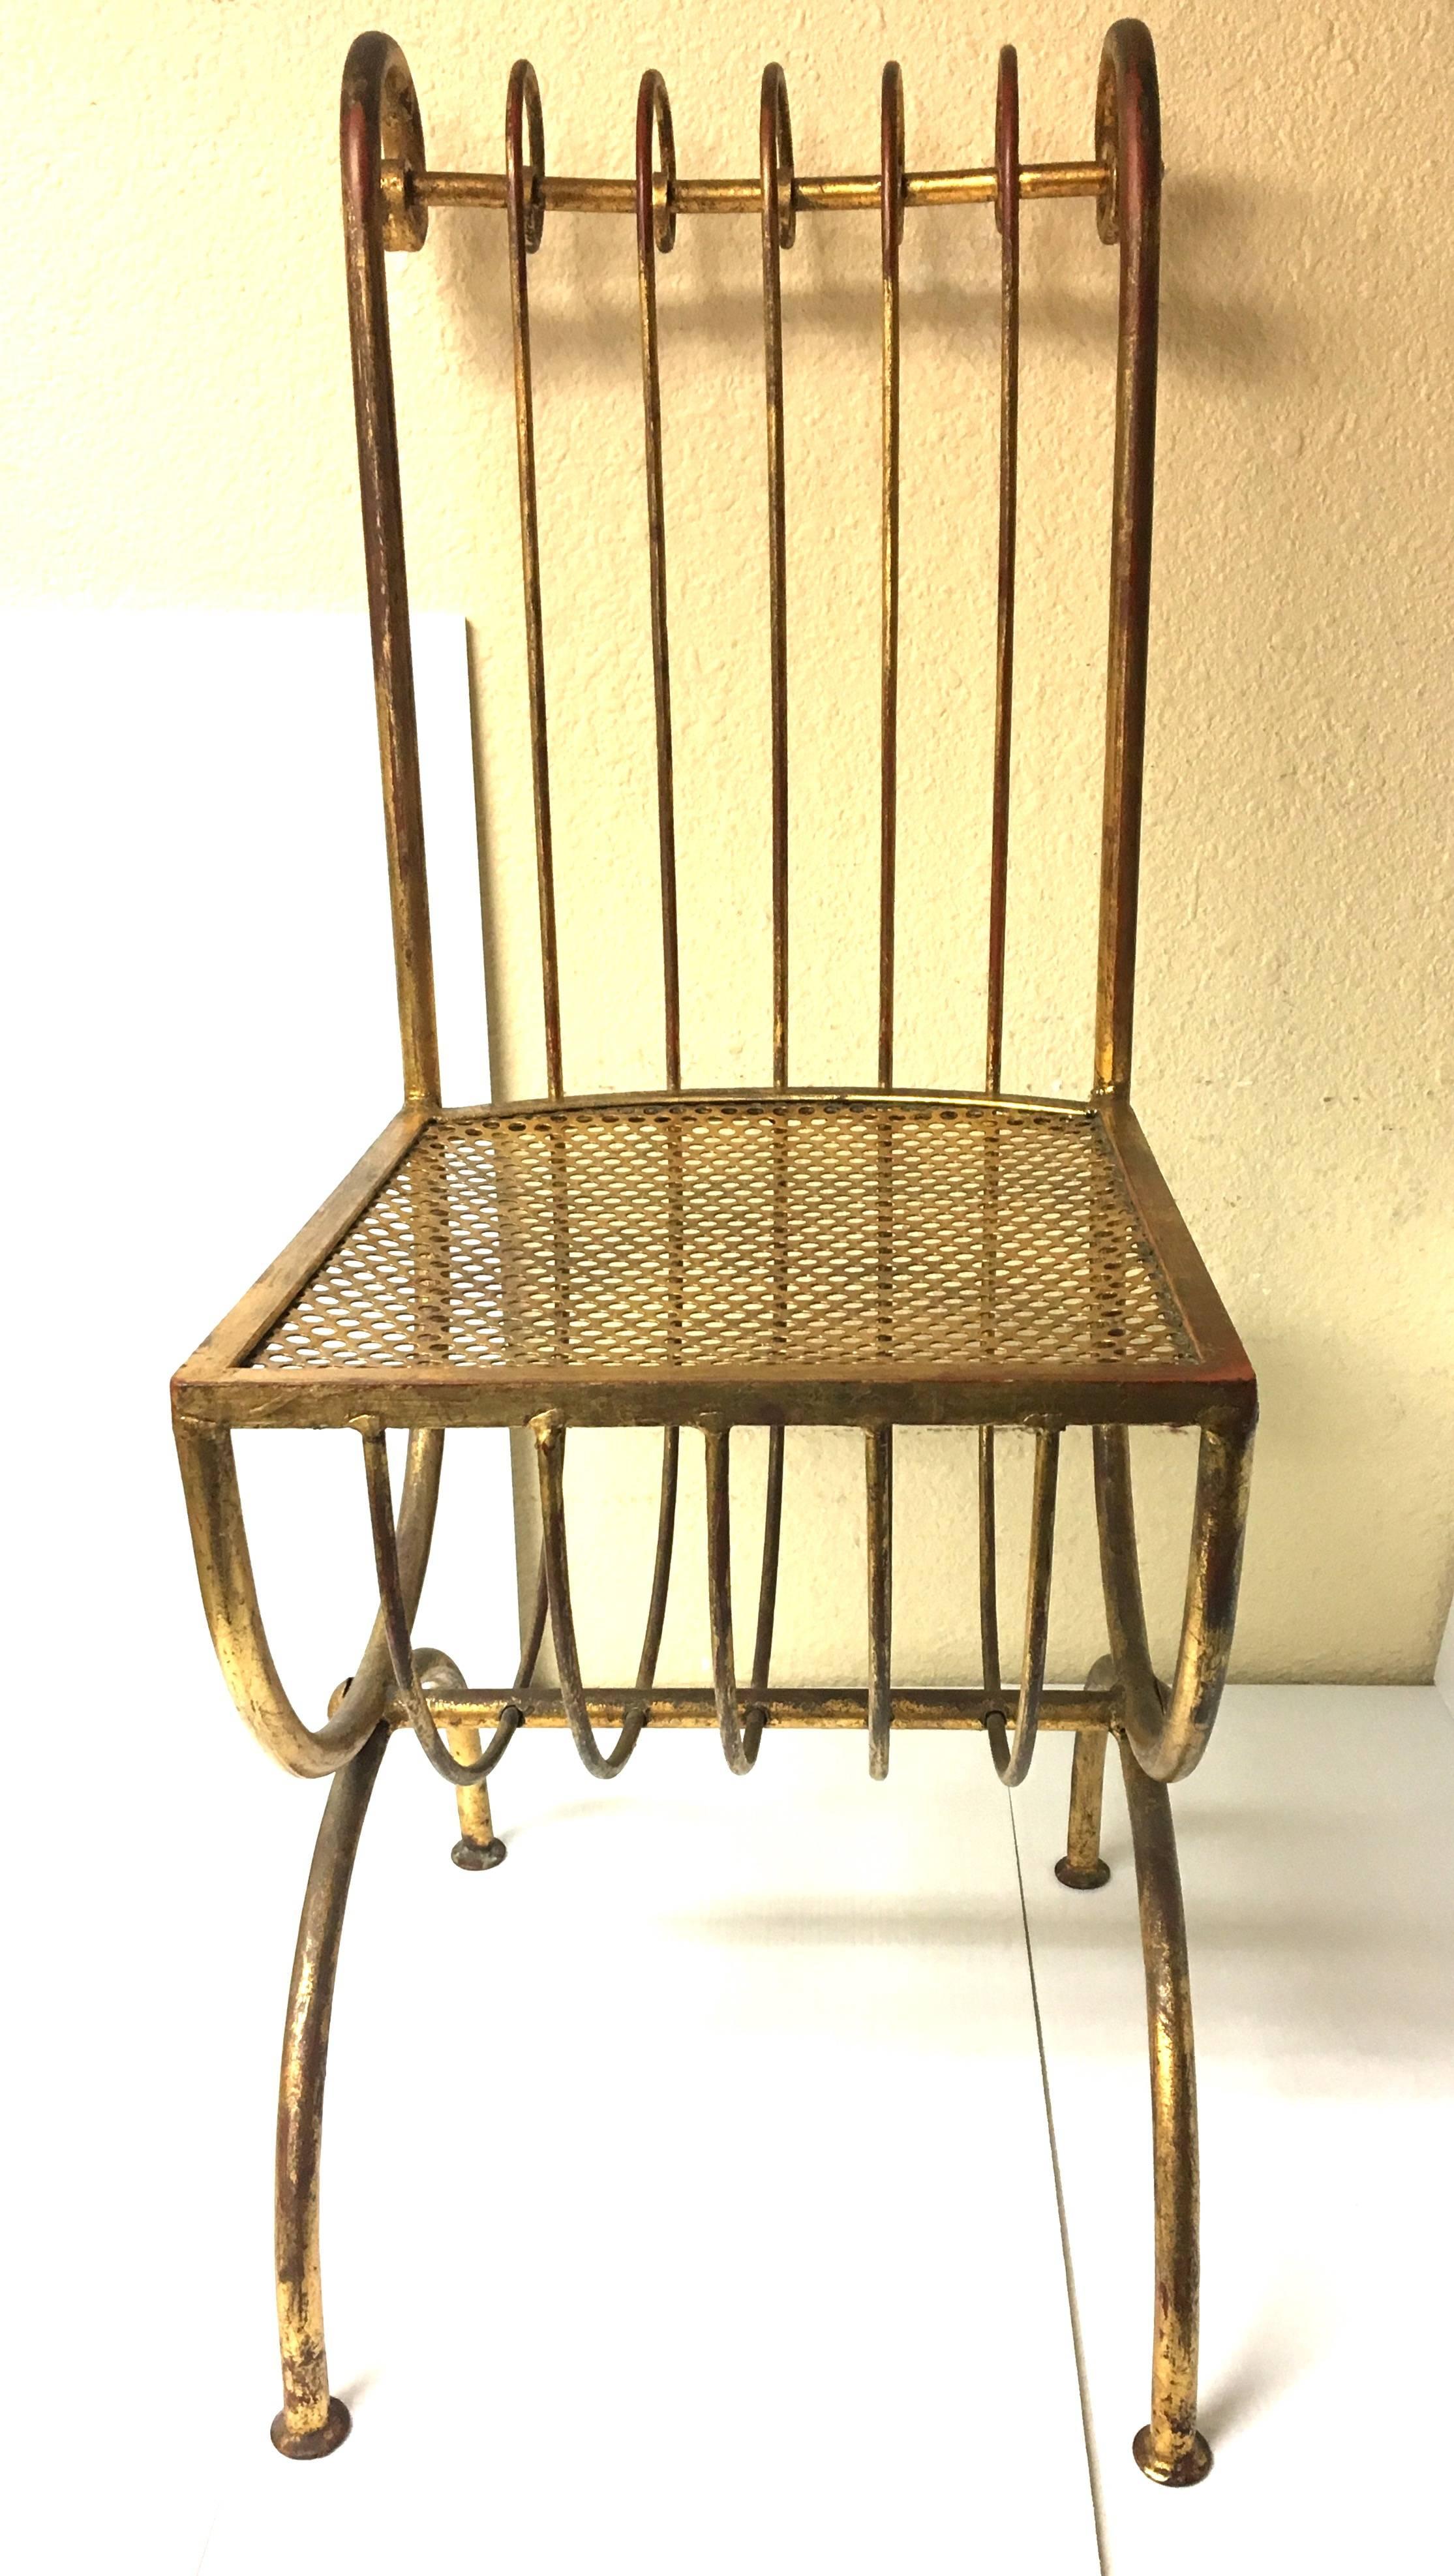 Elegant single accent / vanity chair made by Salvadori in Italy, circa 1960s. The chair has its original gold guild hand-painted finish and is made of solid and sturdy metal. It can be used as is or with a custom-made cushion.